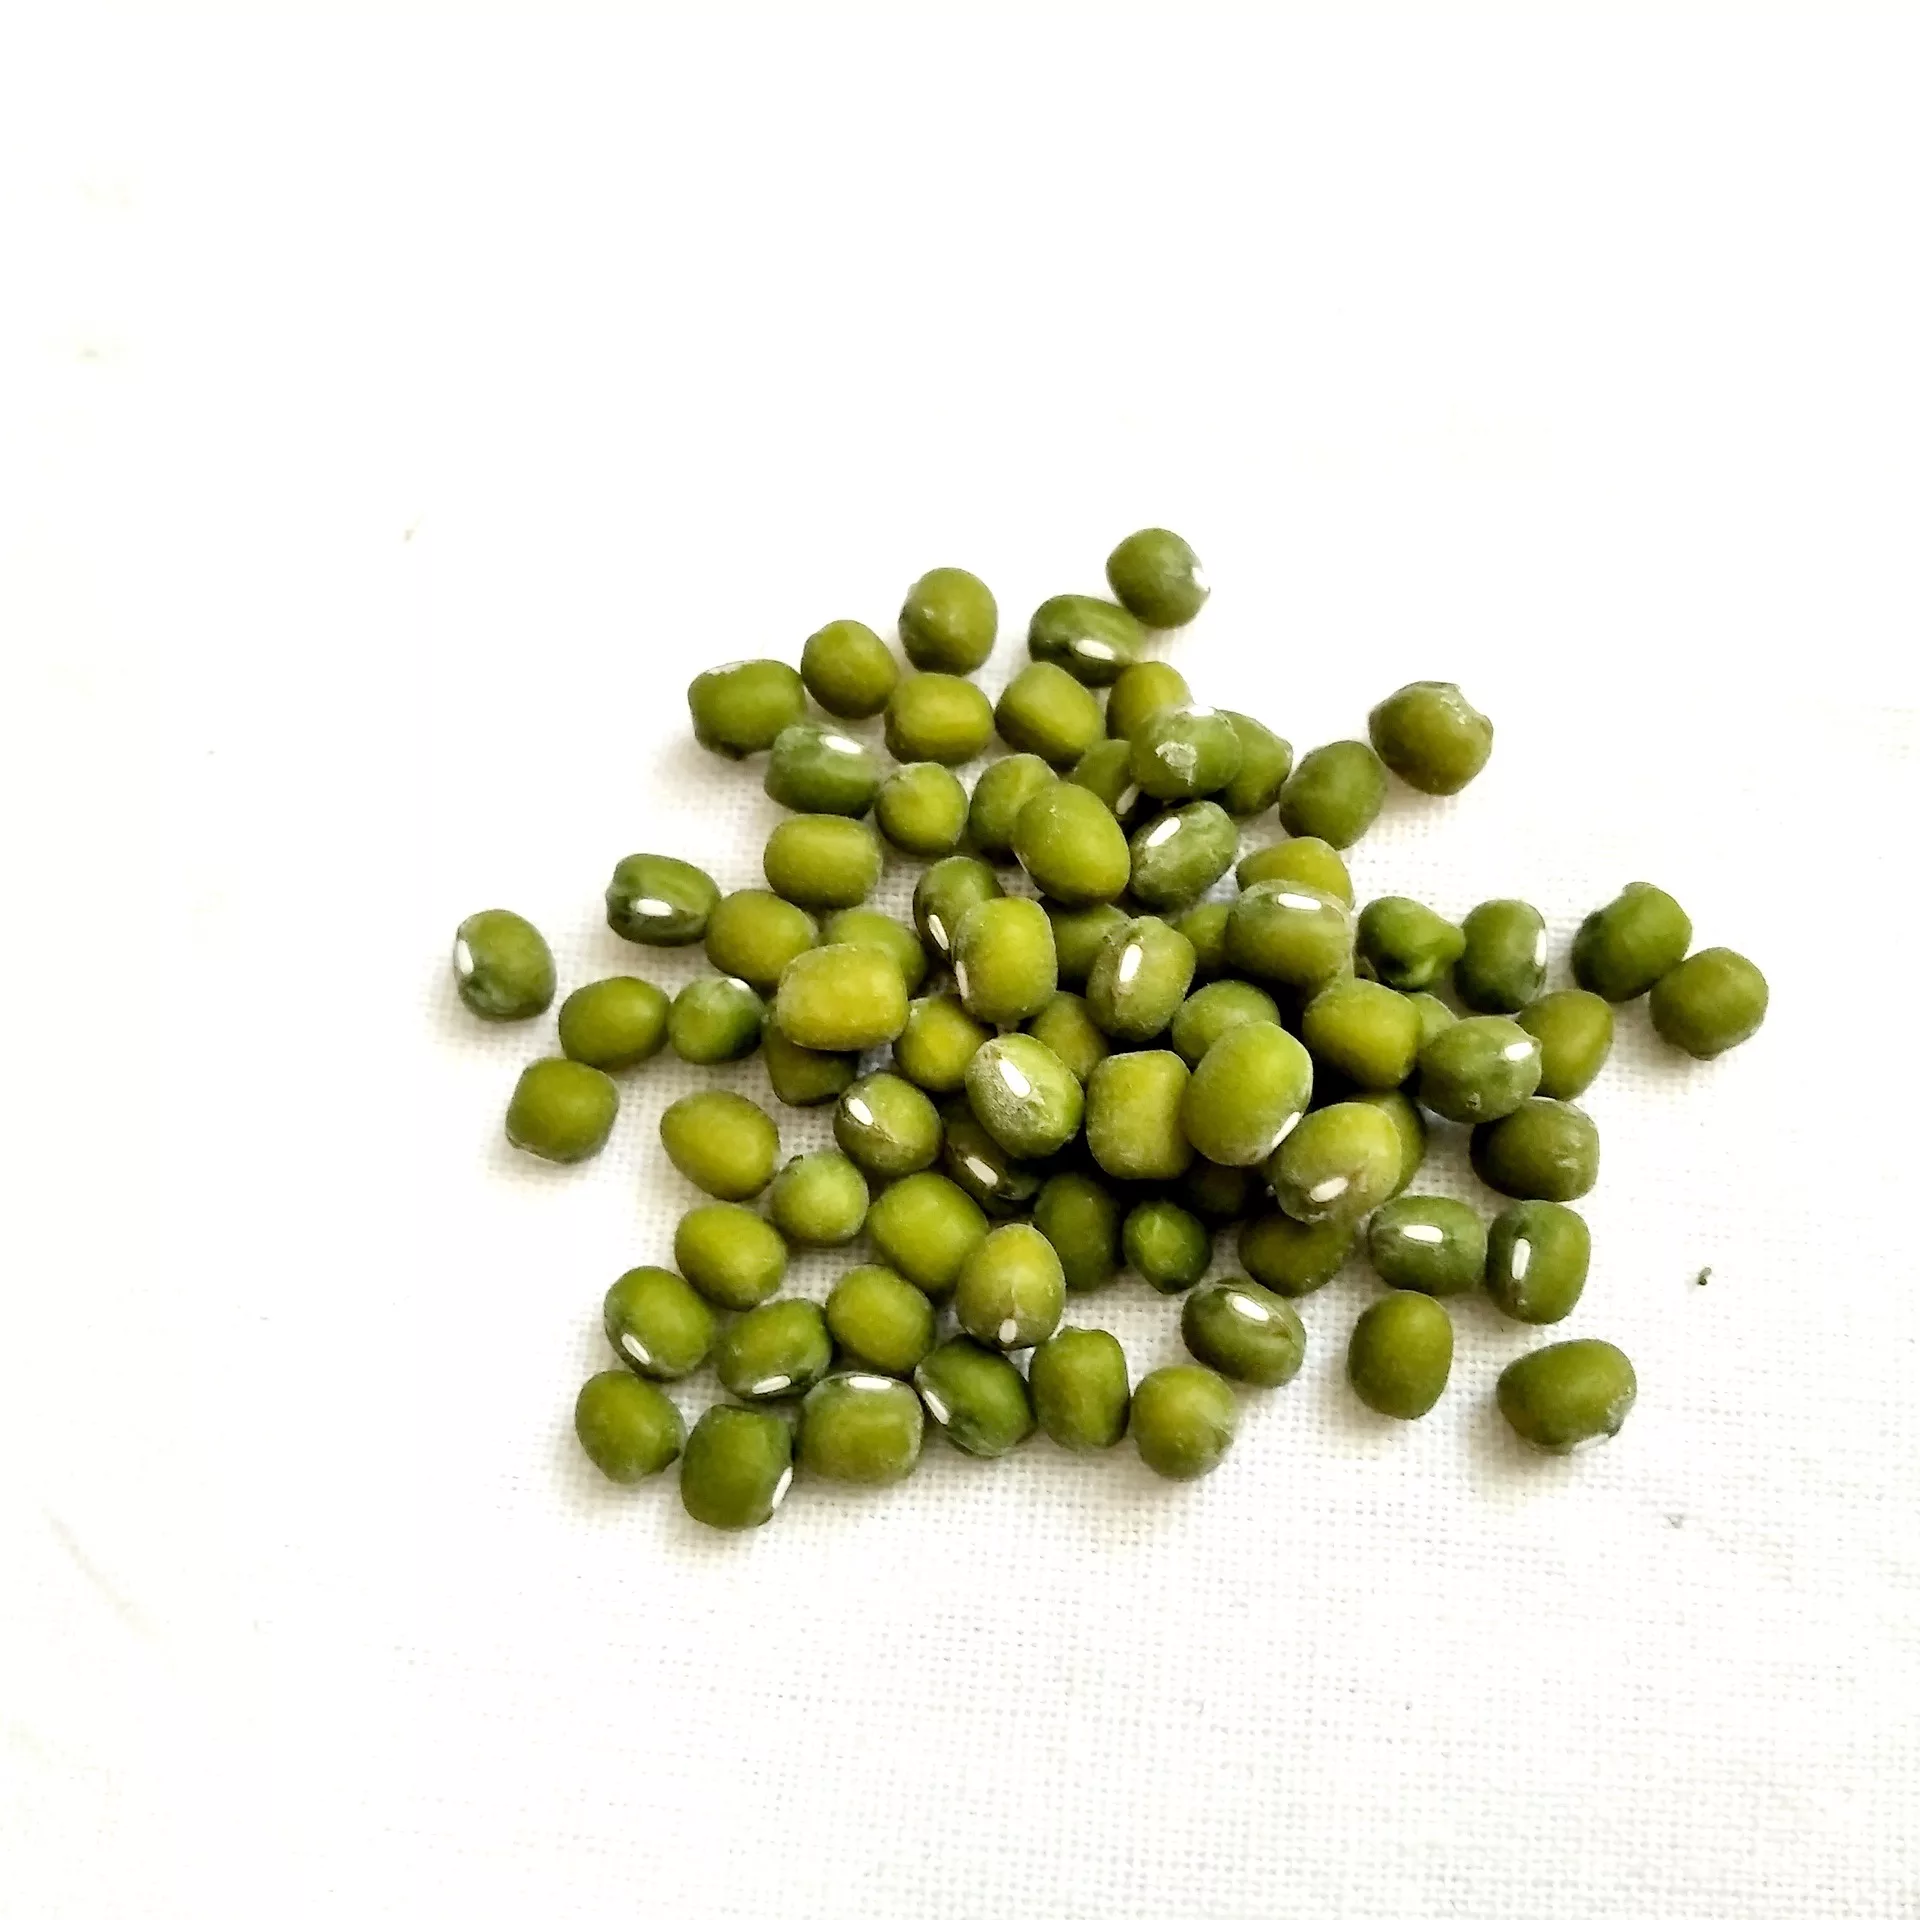 can dogs eat Mung Beans